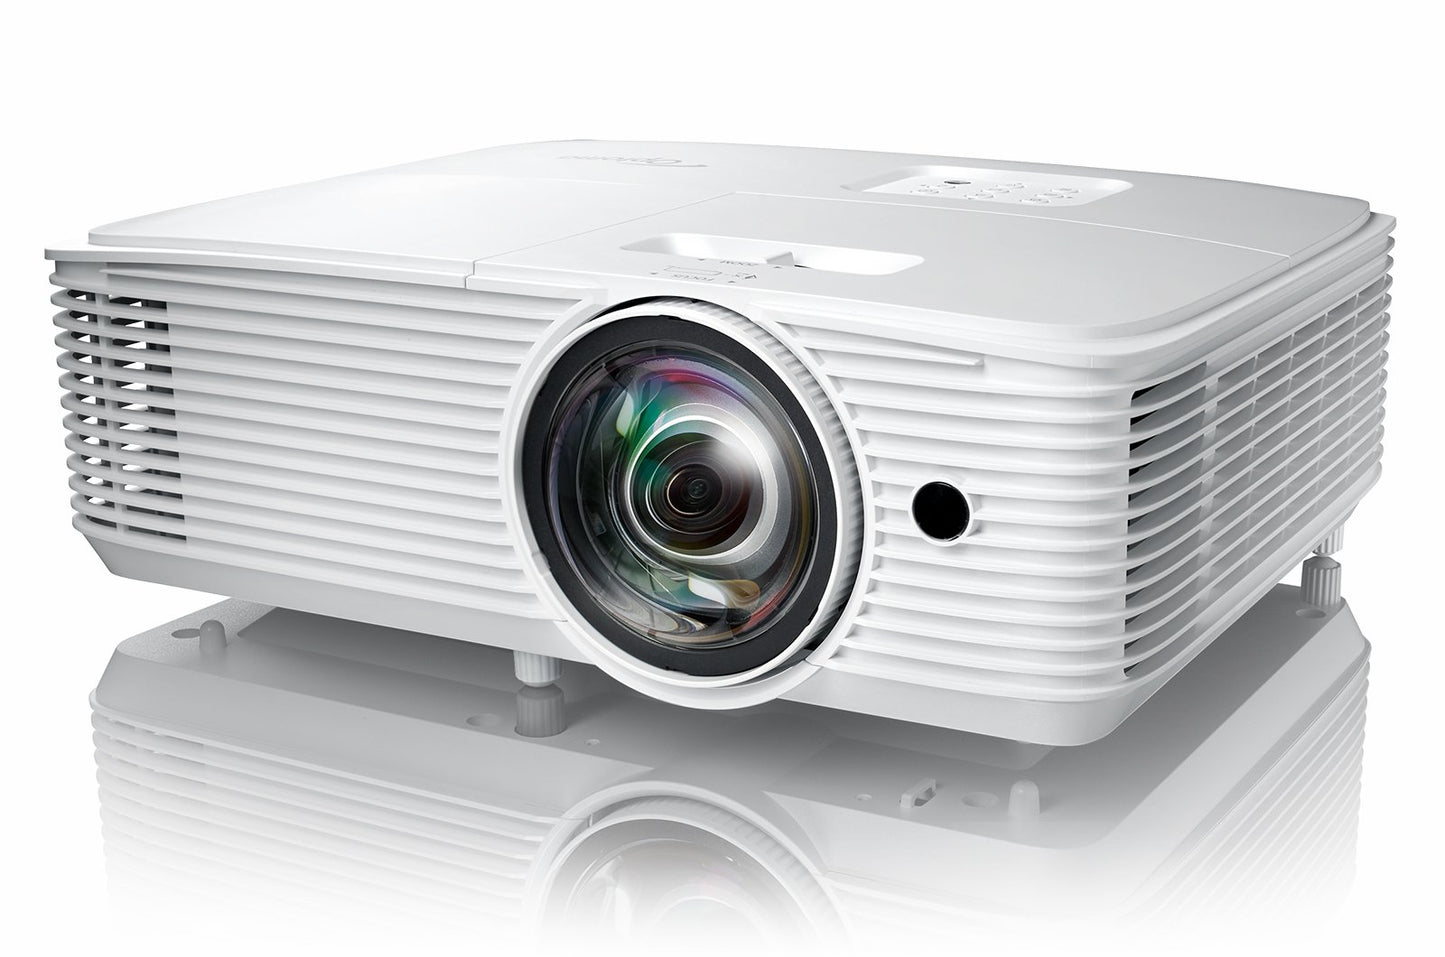 Optoma GT1080HDR Short Throw Projector